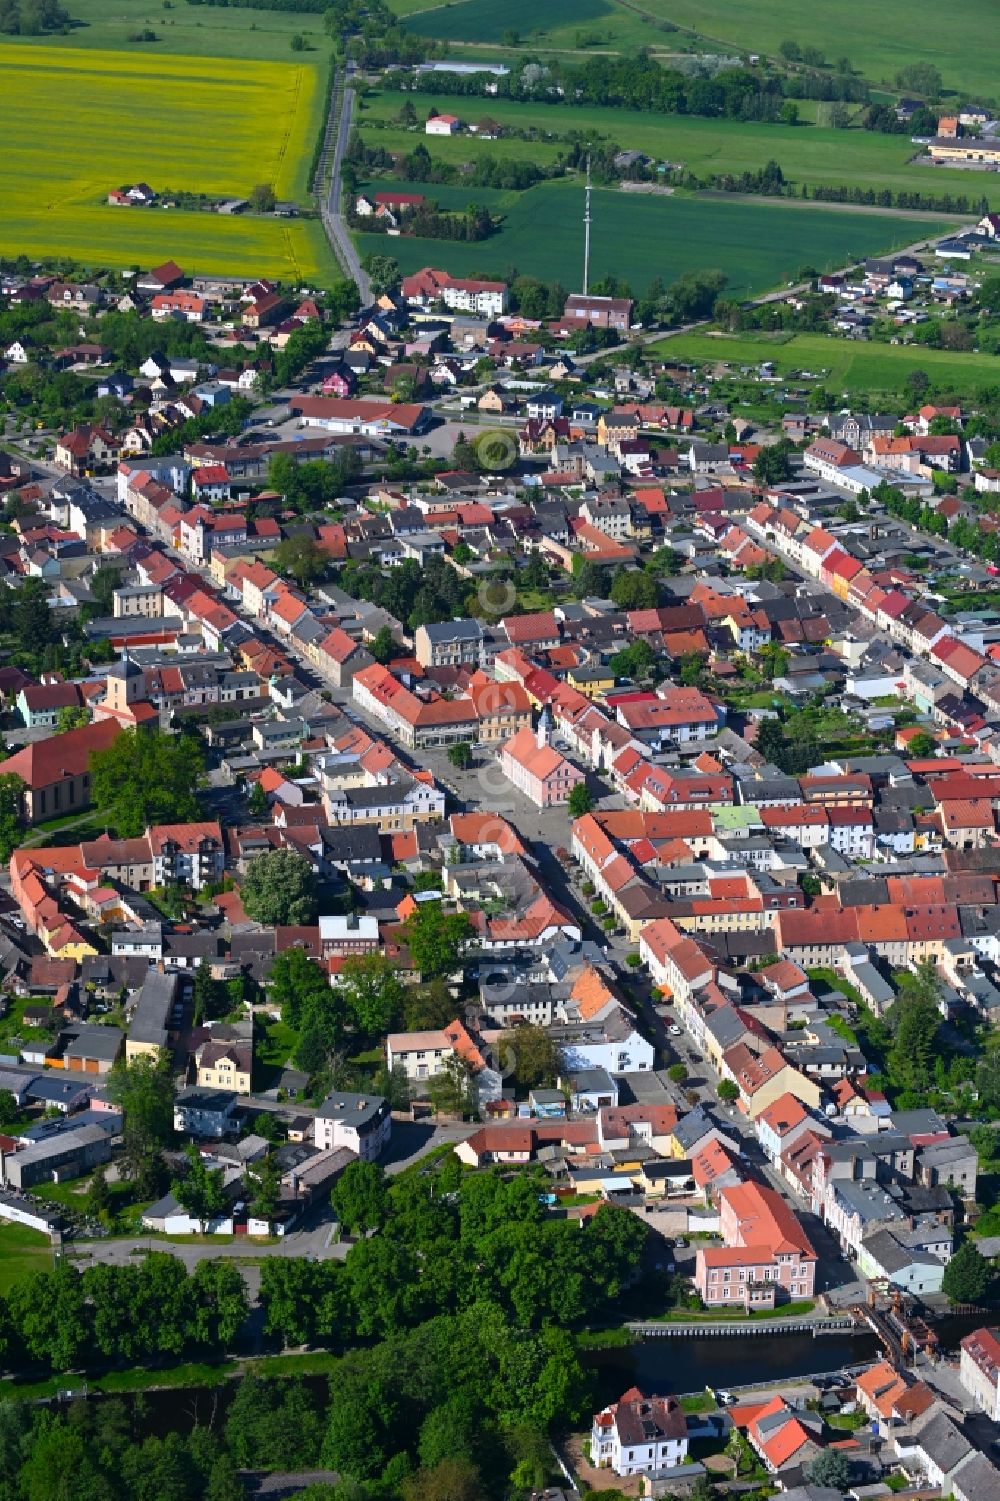 Zehdenick from the bird's eye view: City view of the inner city area along Dammhaststrasse in Zehdenick in the state Brandenburg, Germany